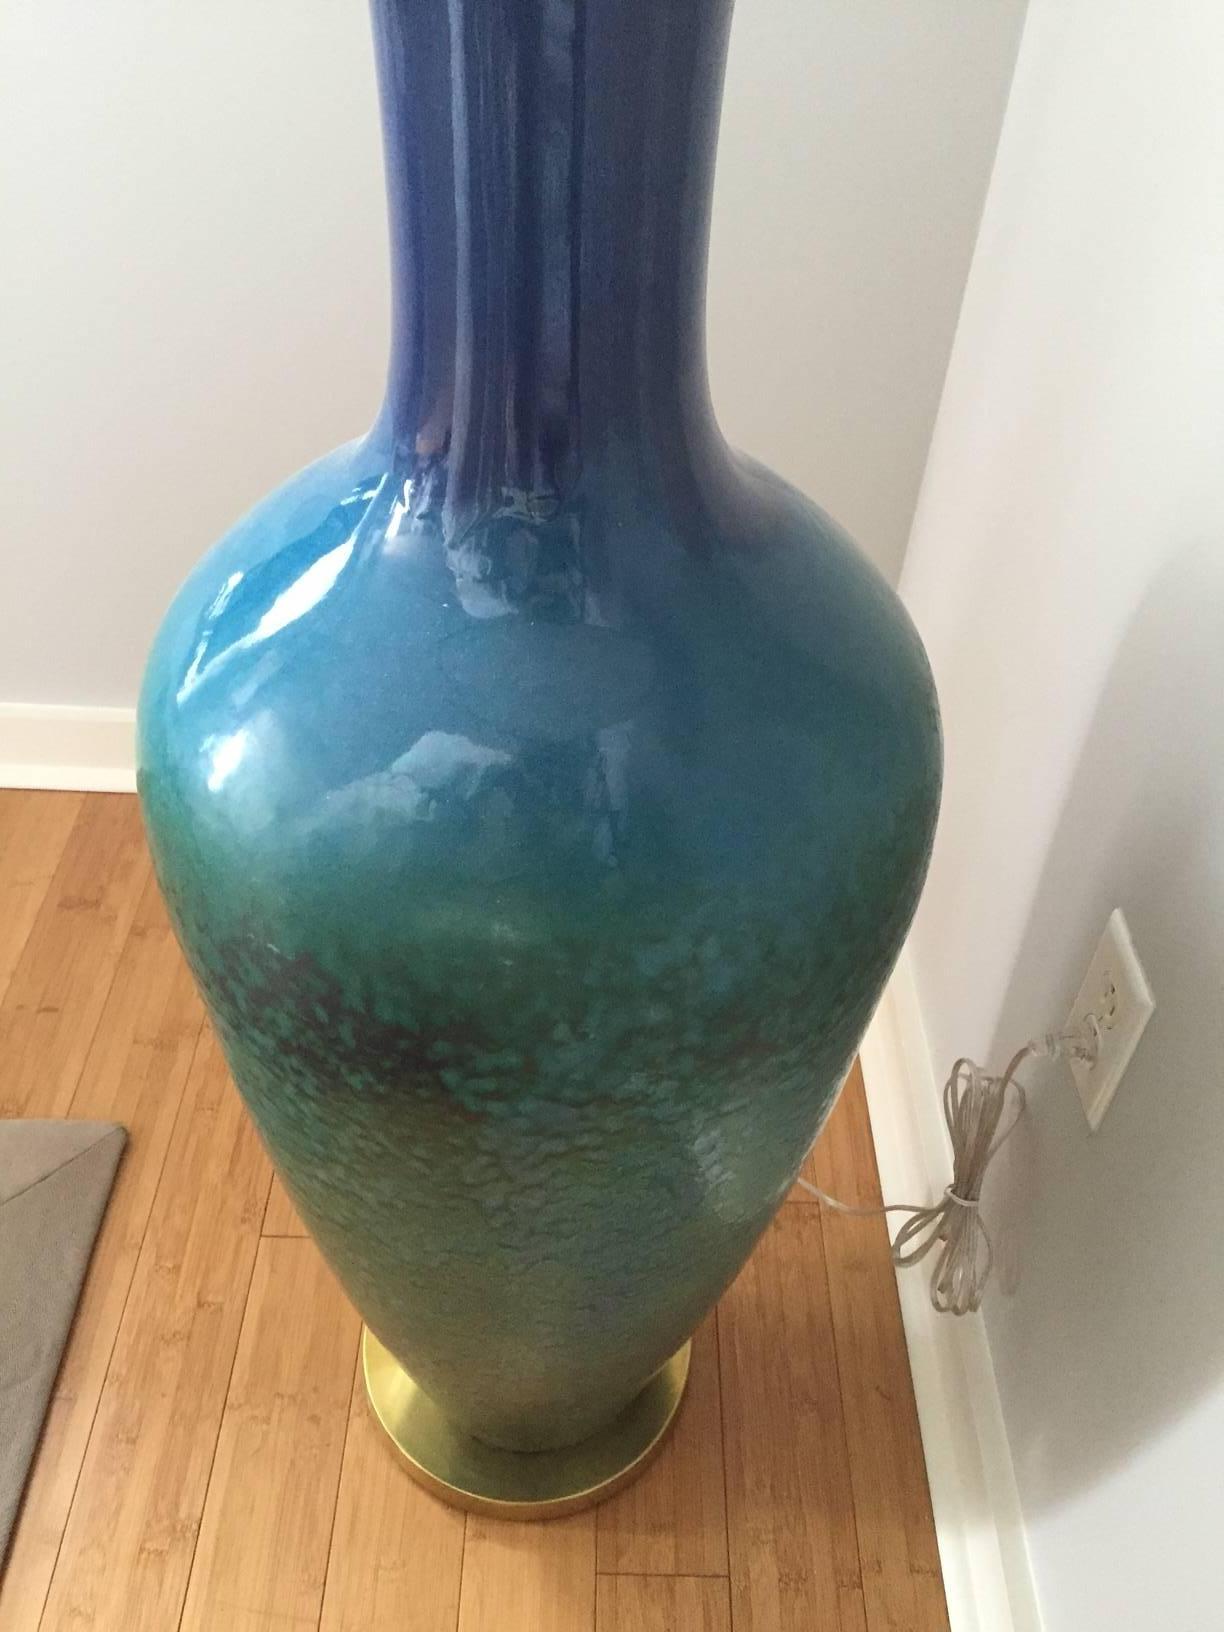 Blue and green glazed vintage floor lamp with brass base. The height to top of pottery part of lamp is 42